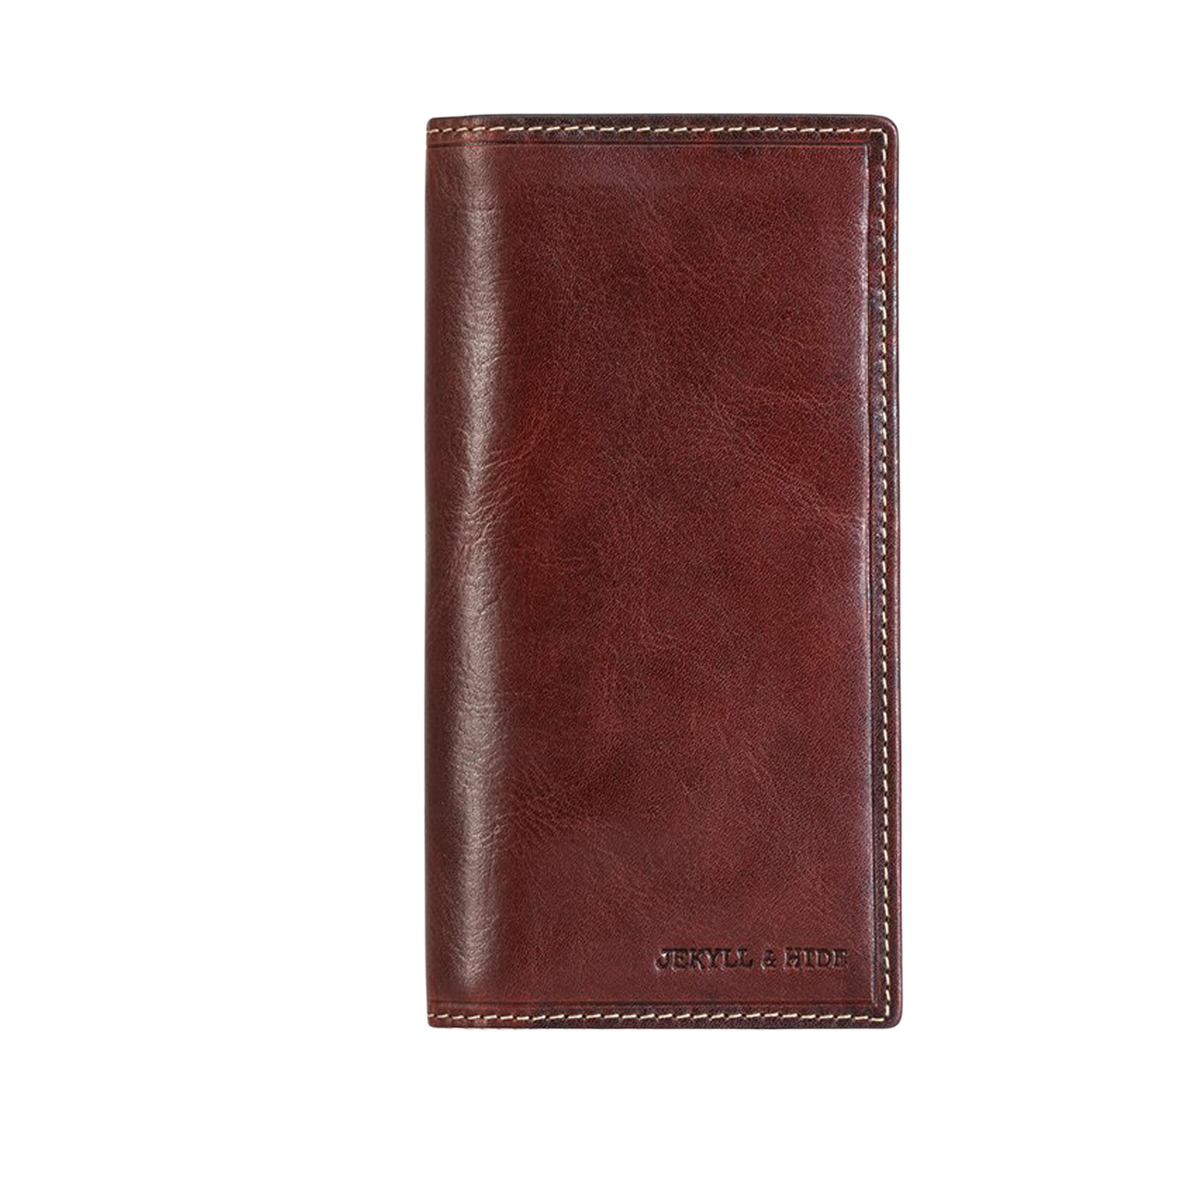 JEKYLL & HIDE LARGE TRAVEL AND MOBILE WALLET - OXFORD COFFEE